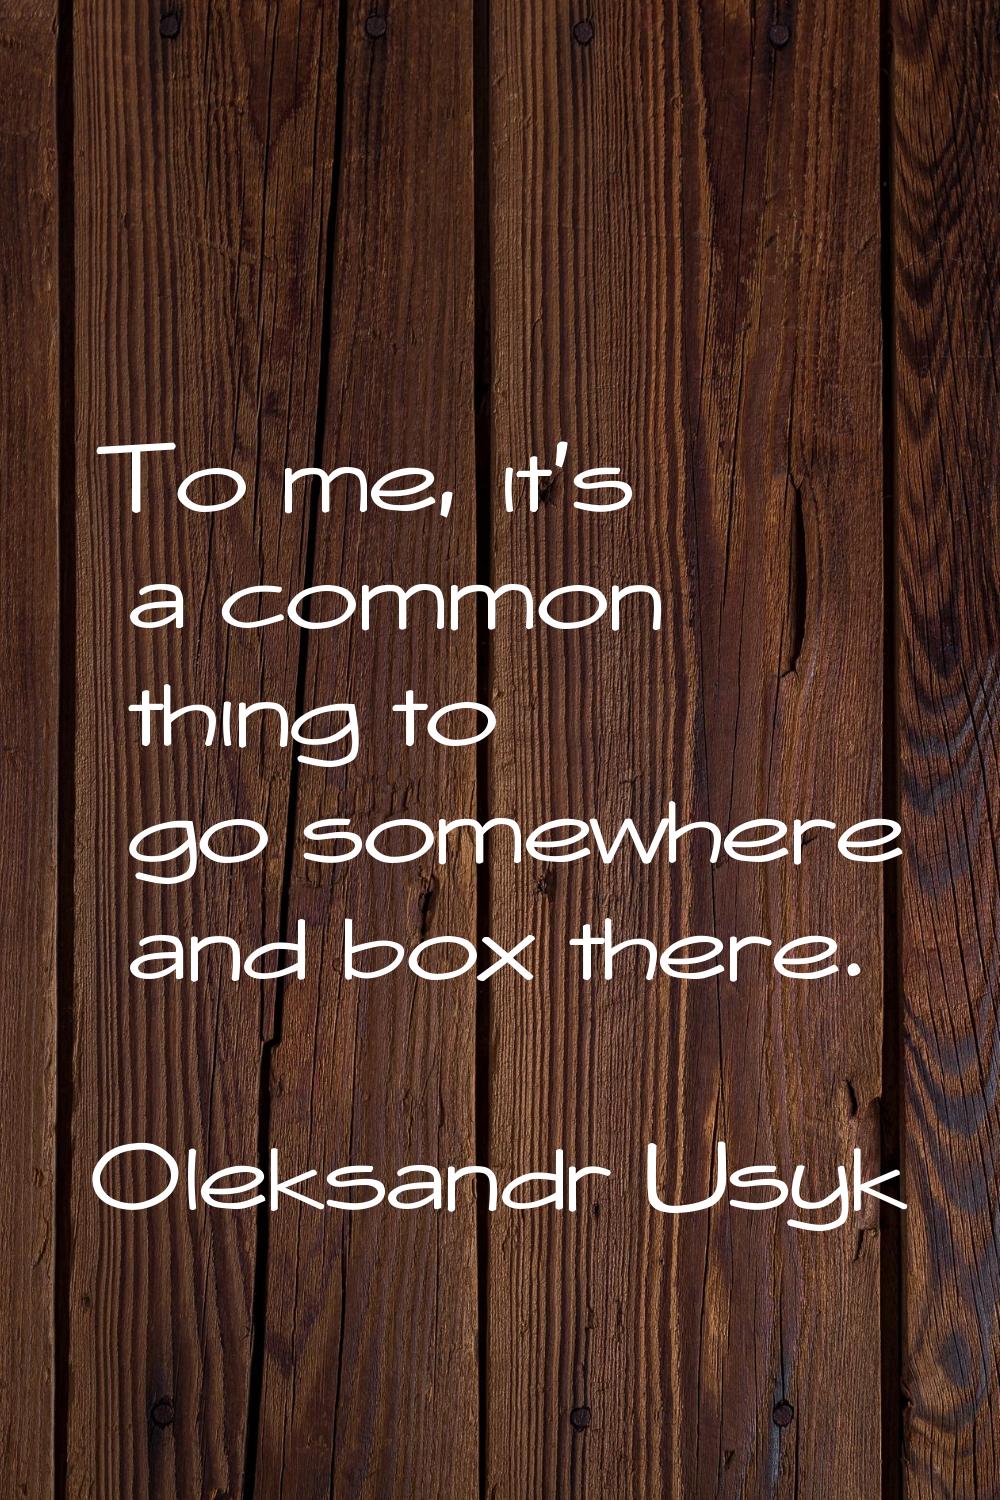 To me, it's a common thing to go somewhere and box there.